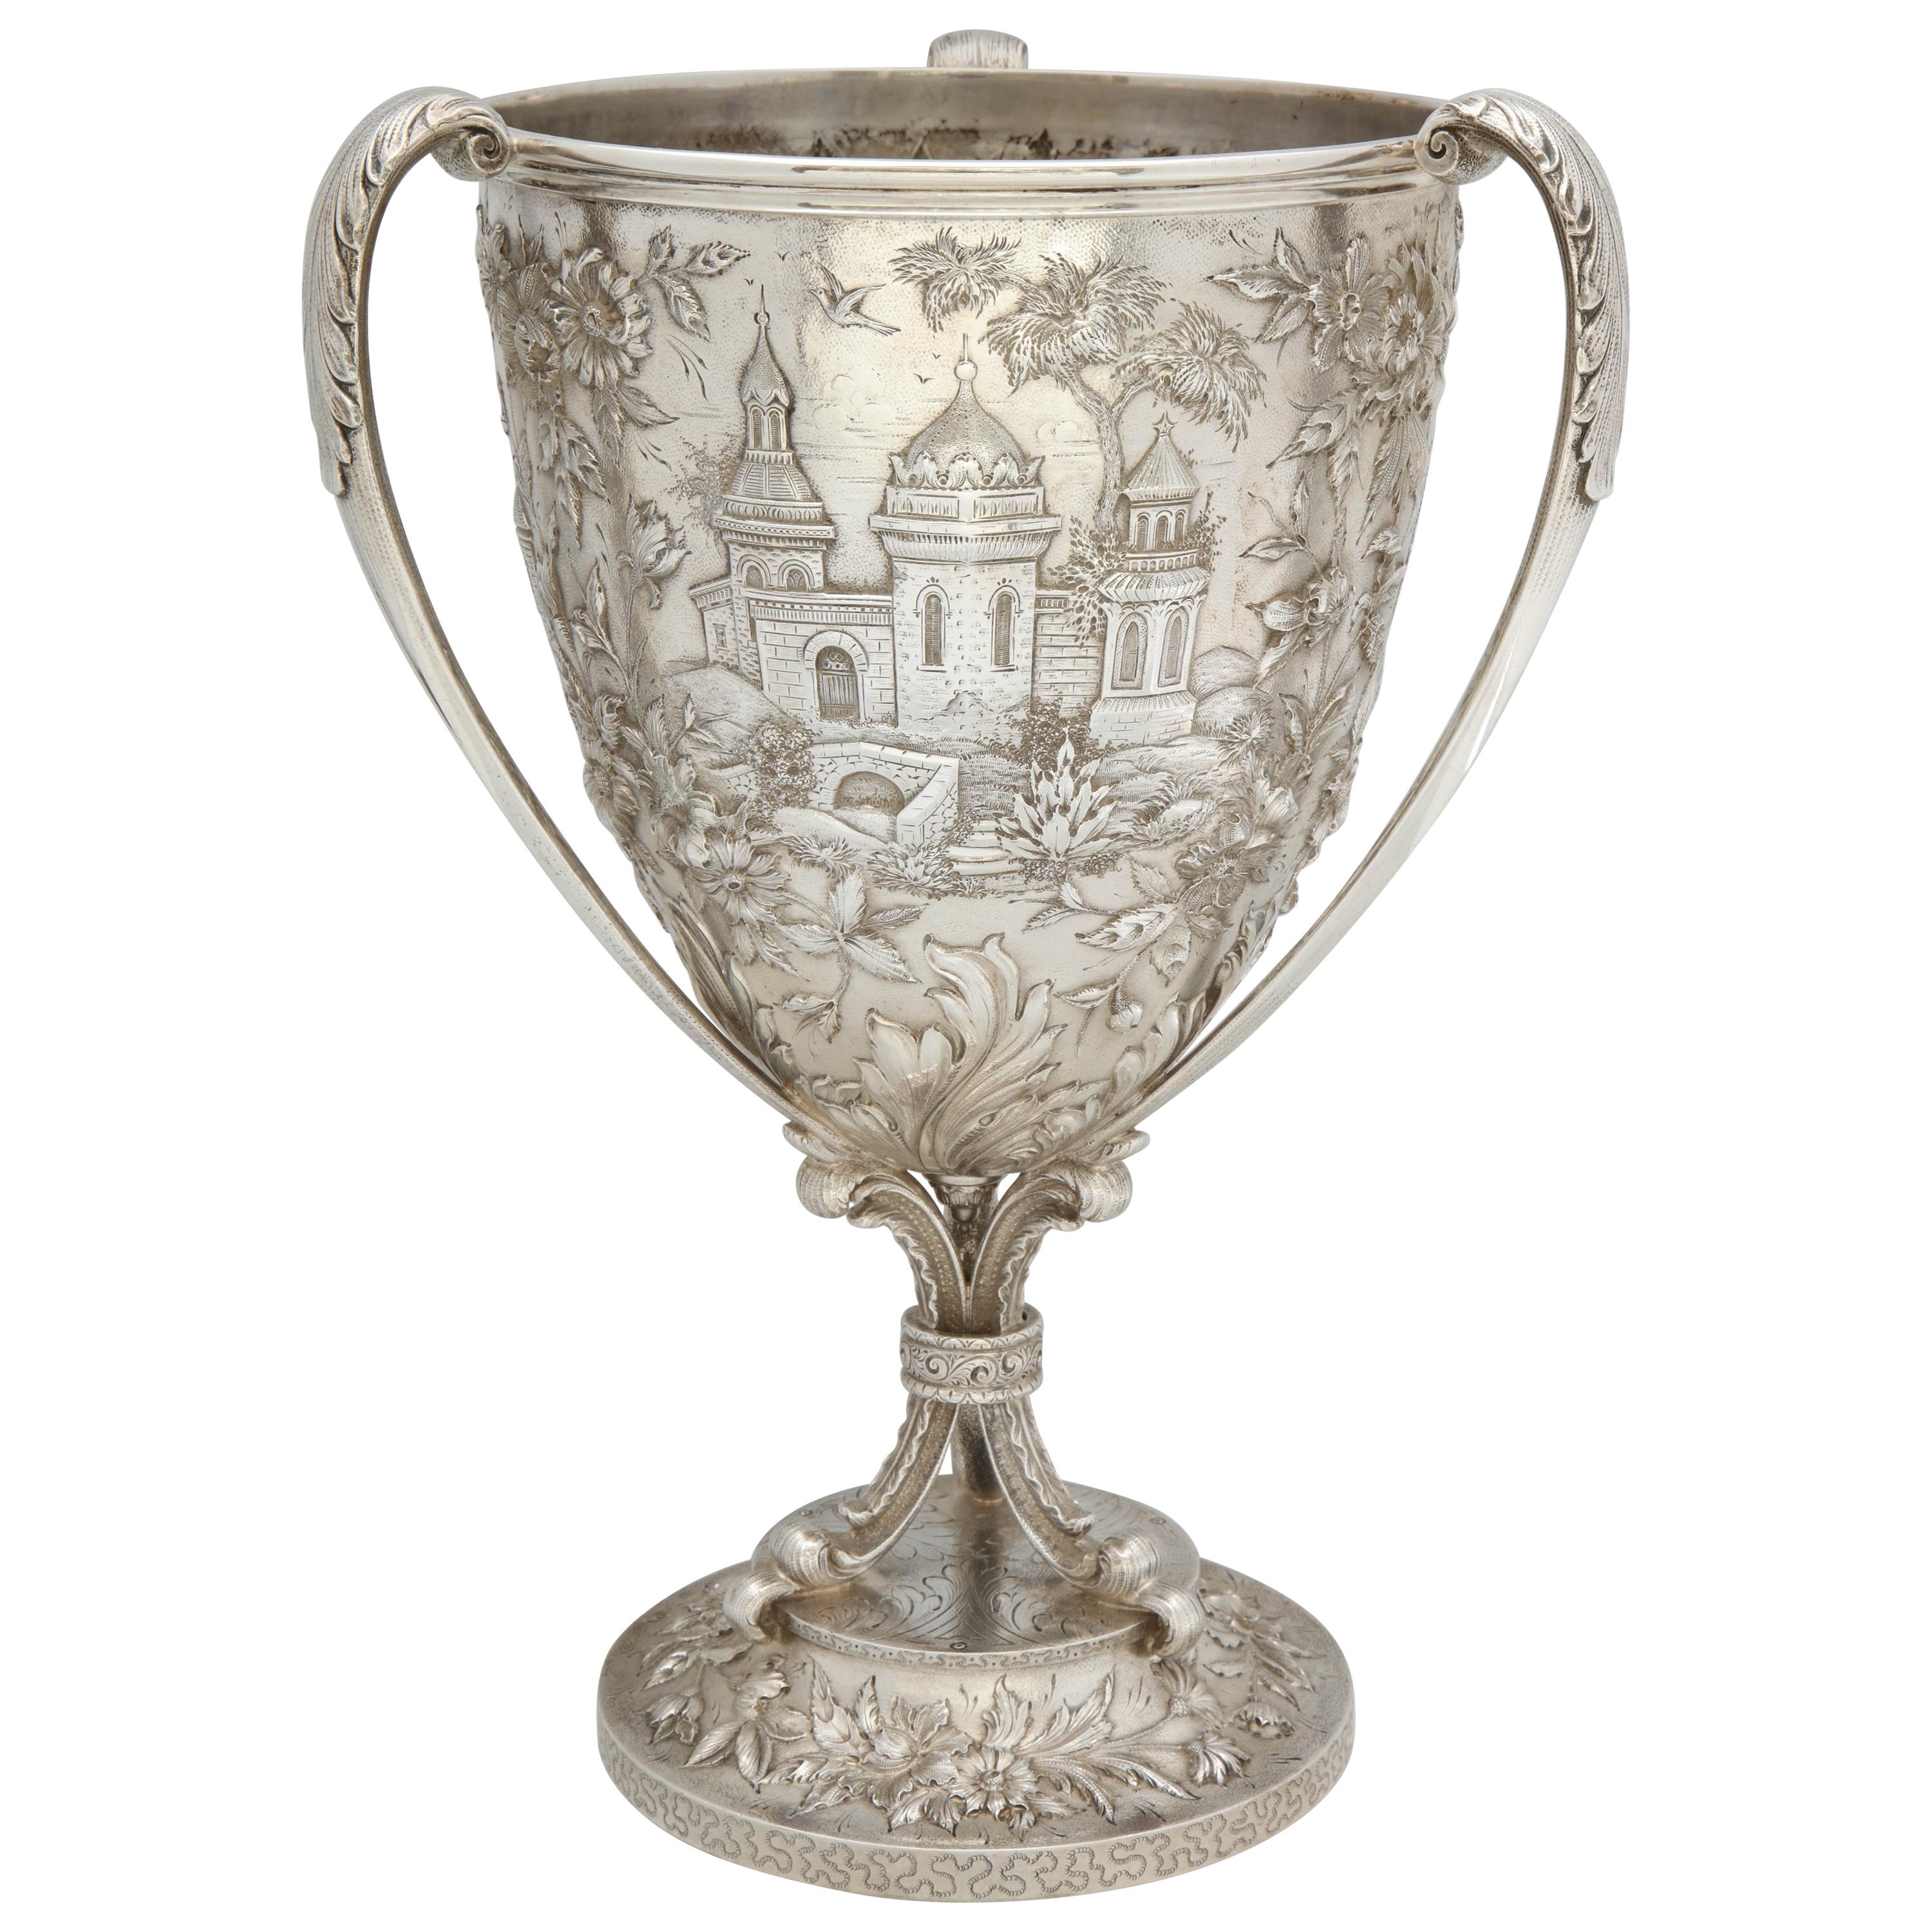 Victorian, Sterling Silver Three-Handled Loving Cup by S. Kirk and Son